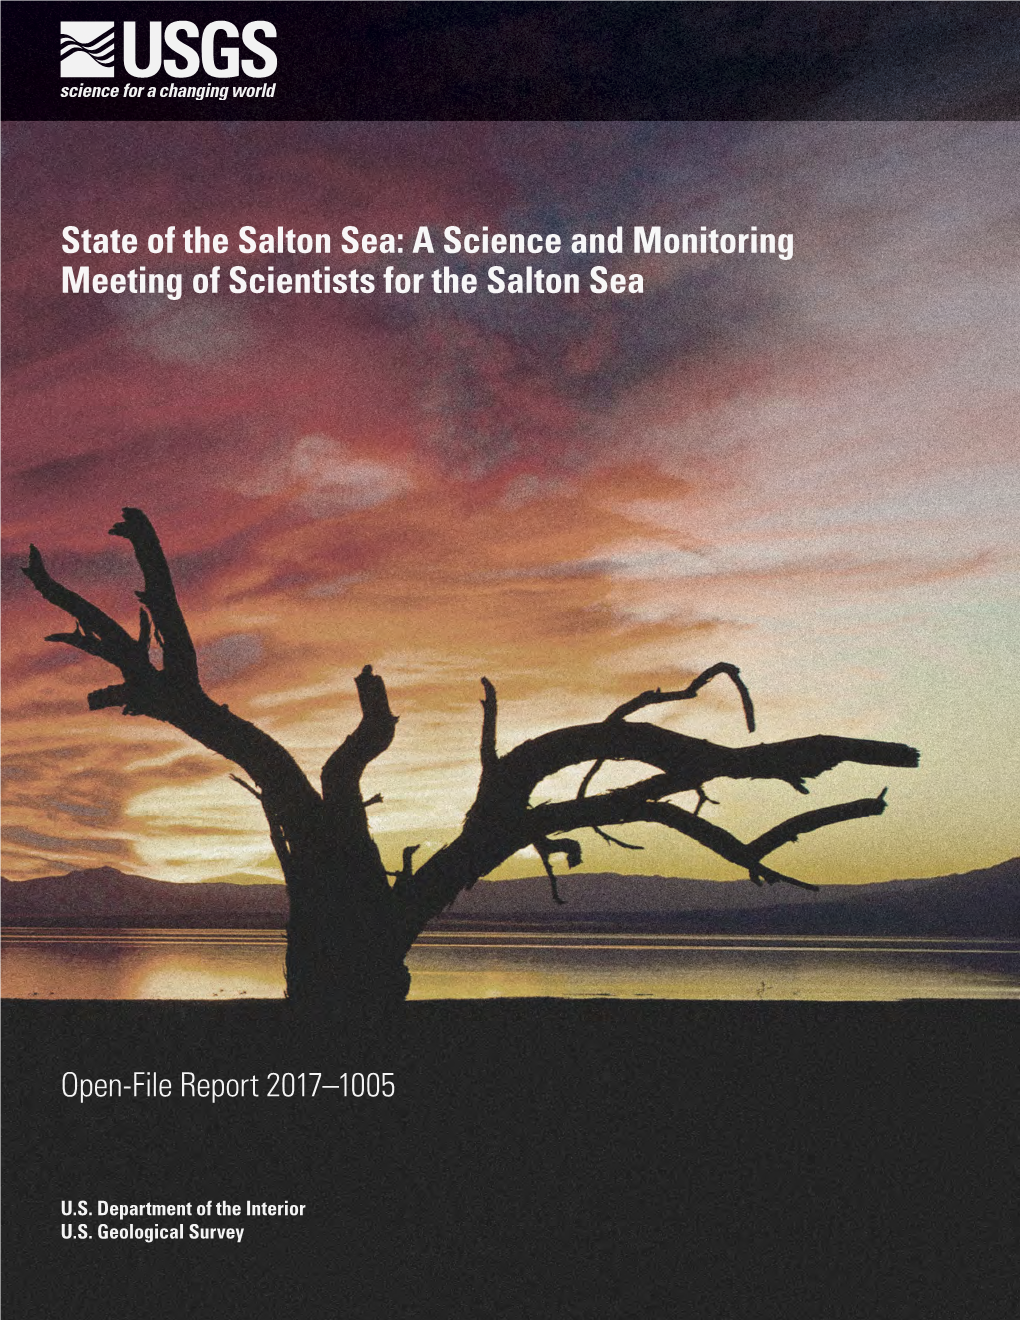 A Science and Monitoring Meeting of Scientists for the Salton Sea